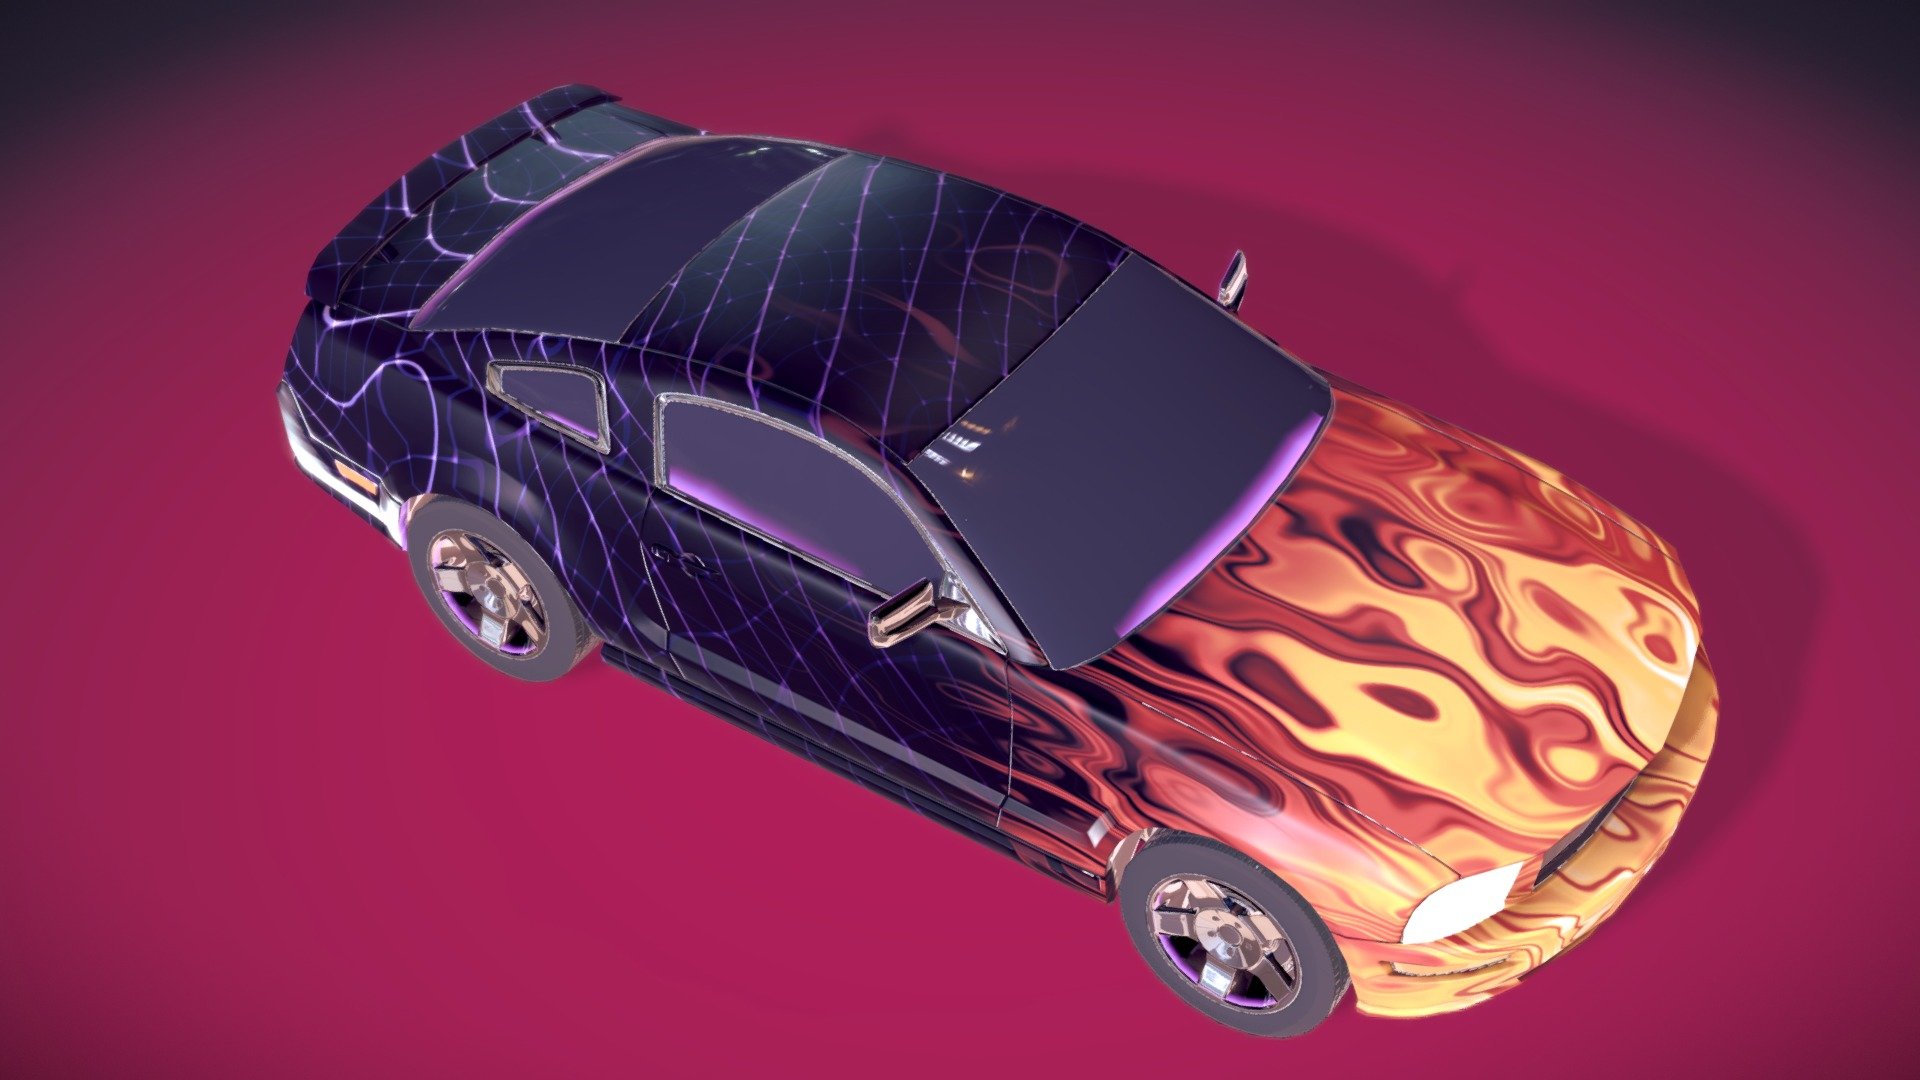 Procedural texture paint made in blender.

Based on &ldquo;Sketchfab Texturing Challenge: Sports Car Base - Base